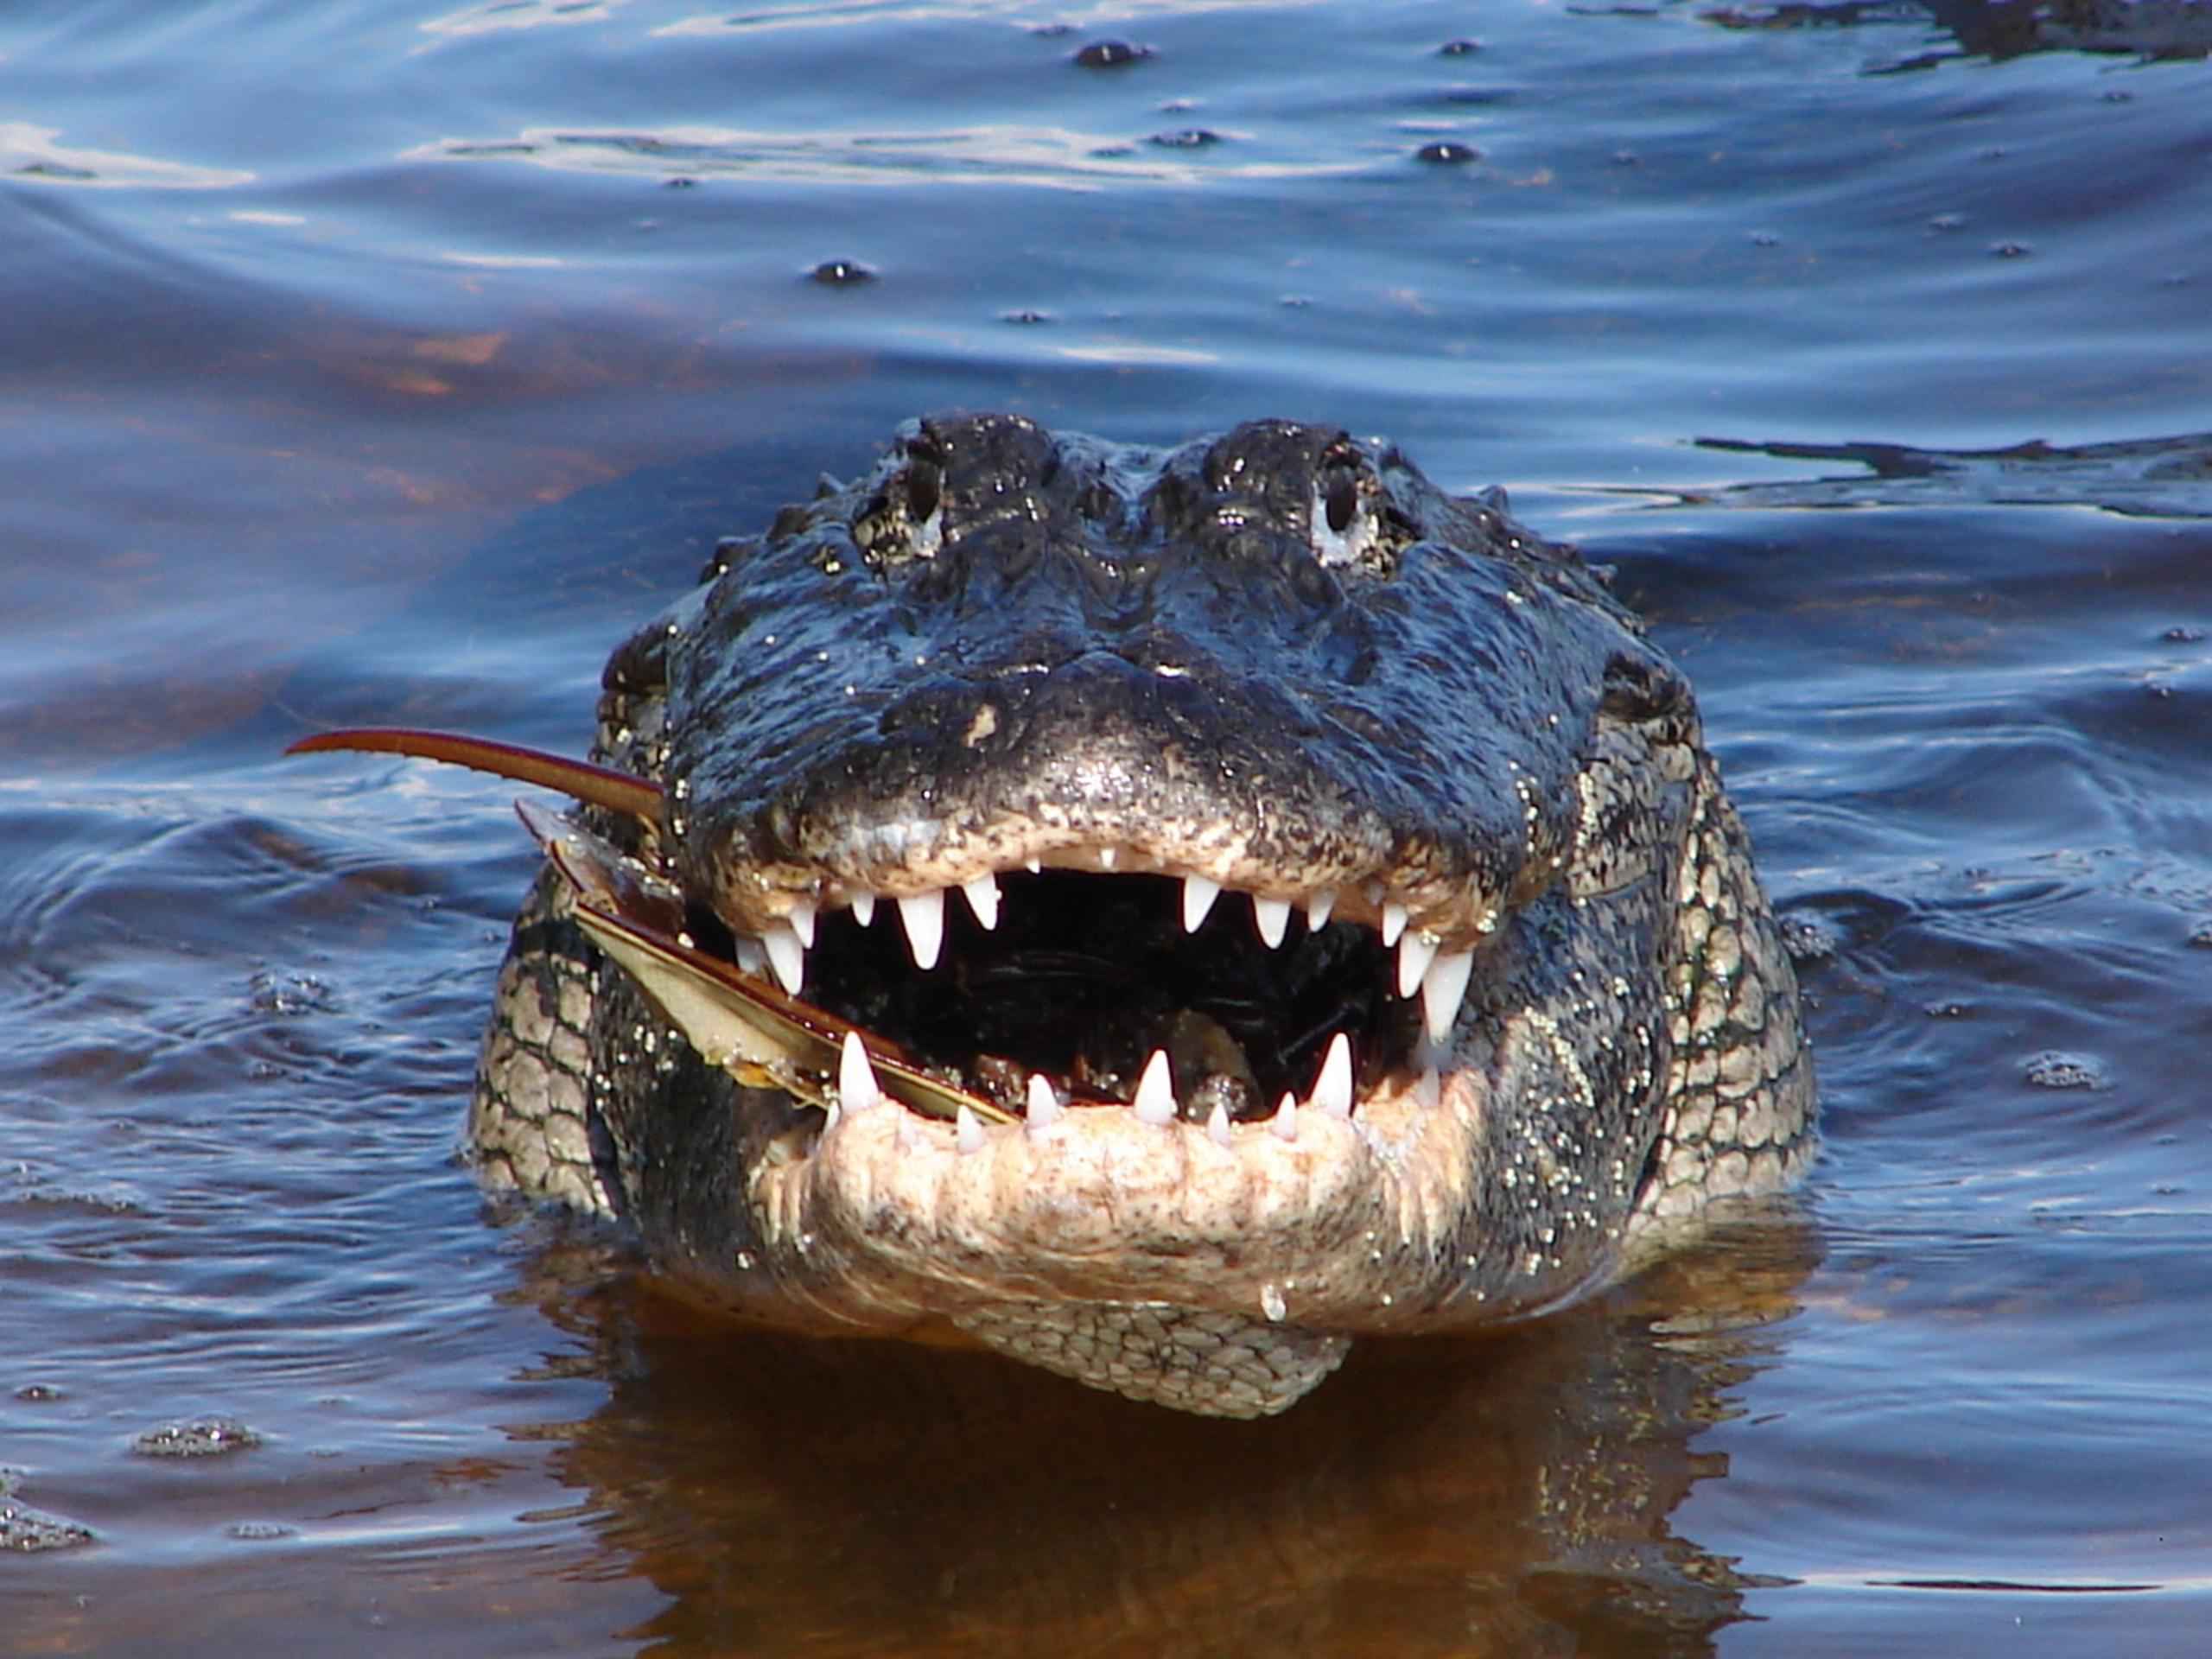 https://pixnio.com/free-images/fauna-animals/reptiles-and-amphibians/alligators-and-crocodiles-pictures/close-up-front-of-adult-alligator-reptile-alligator-mississippiensis.jpg